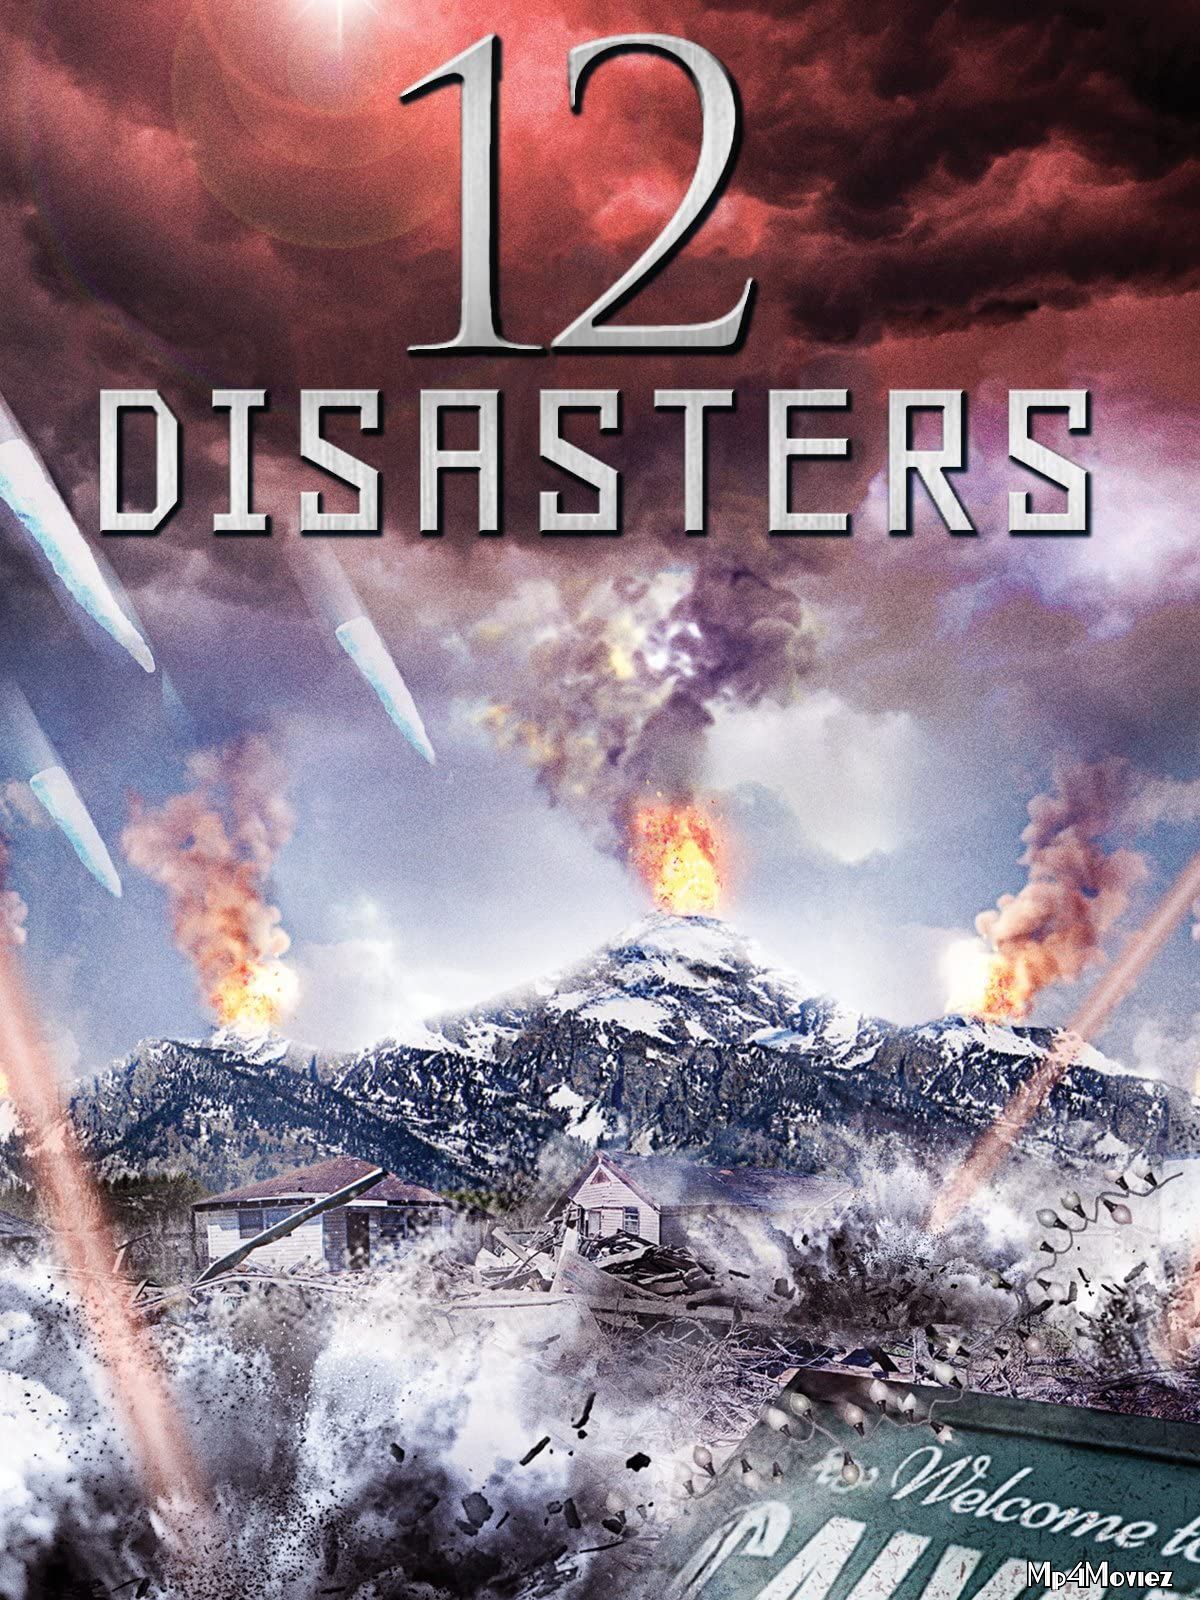 The 12 Disasters of Christmas (2012) Hindi Dubbed Movie download full movie